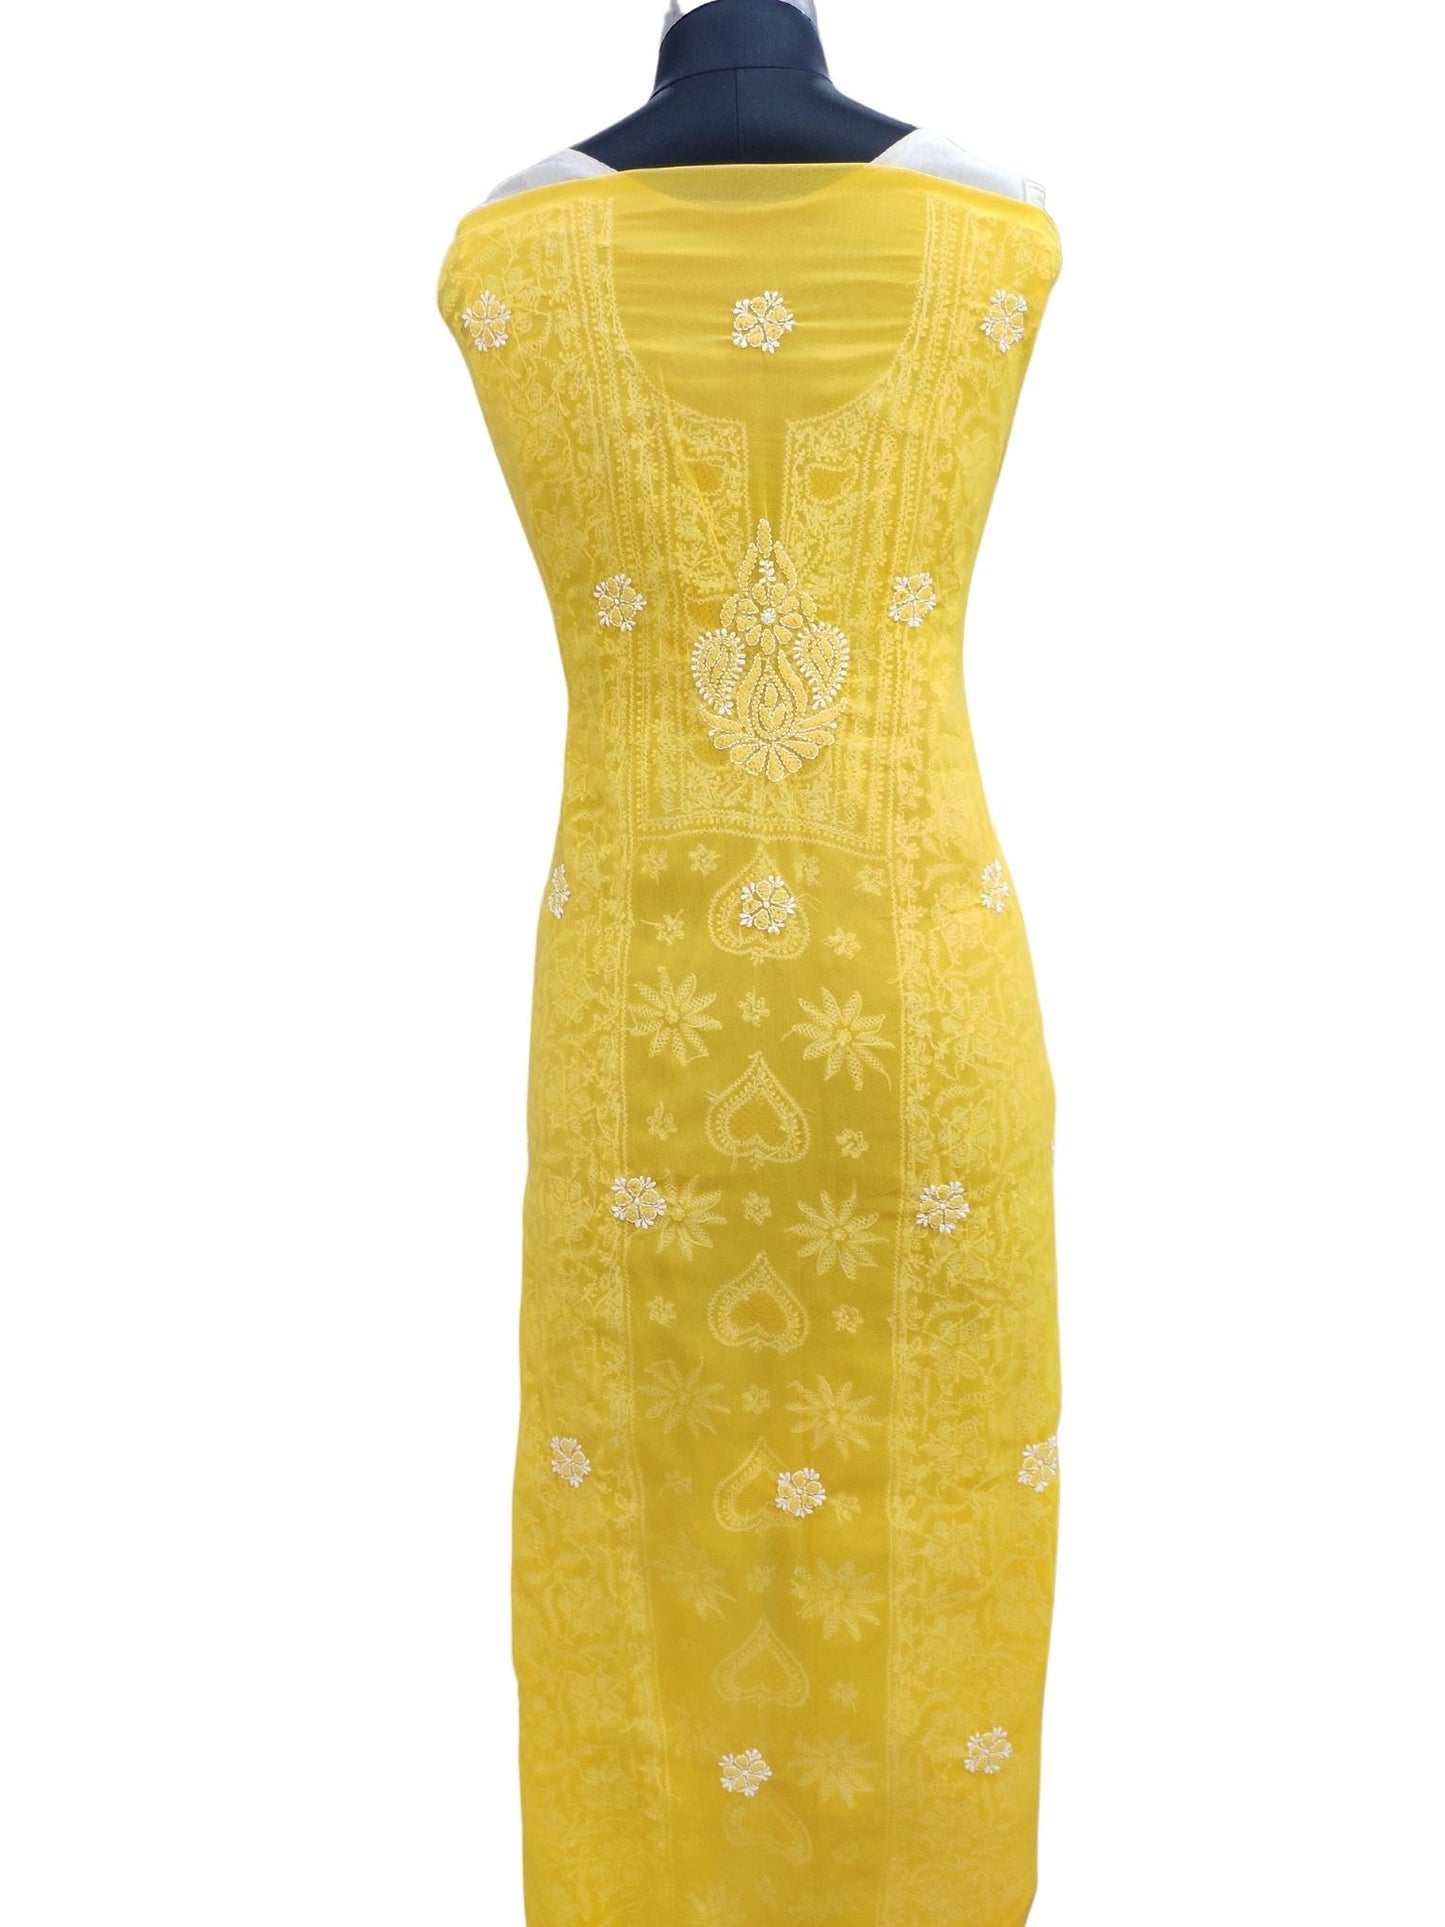 Shyamal Chikan Hand Embroidered Yellow Georgette Lucknowi Chikankari Unstitched Suit Piece With Jaali Work - S20251